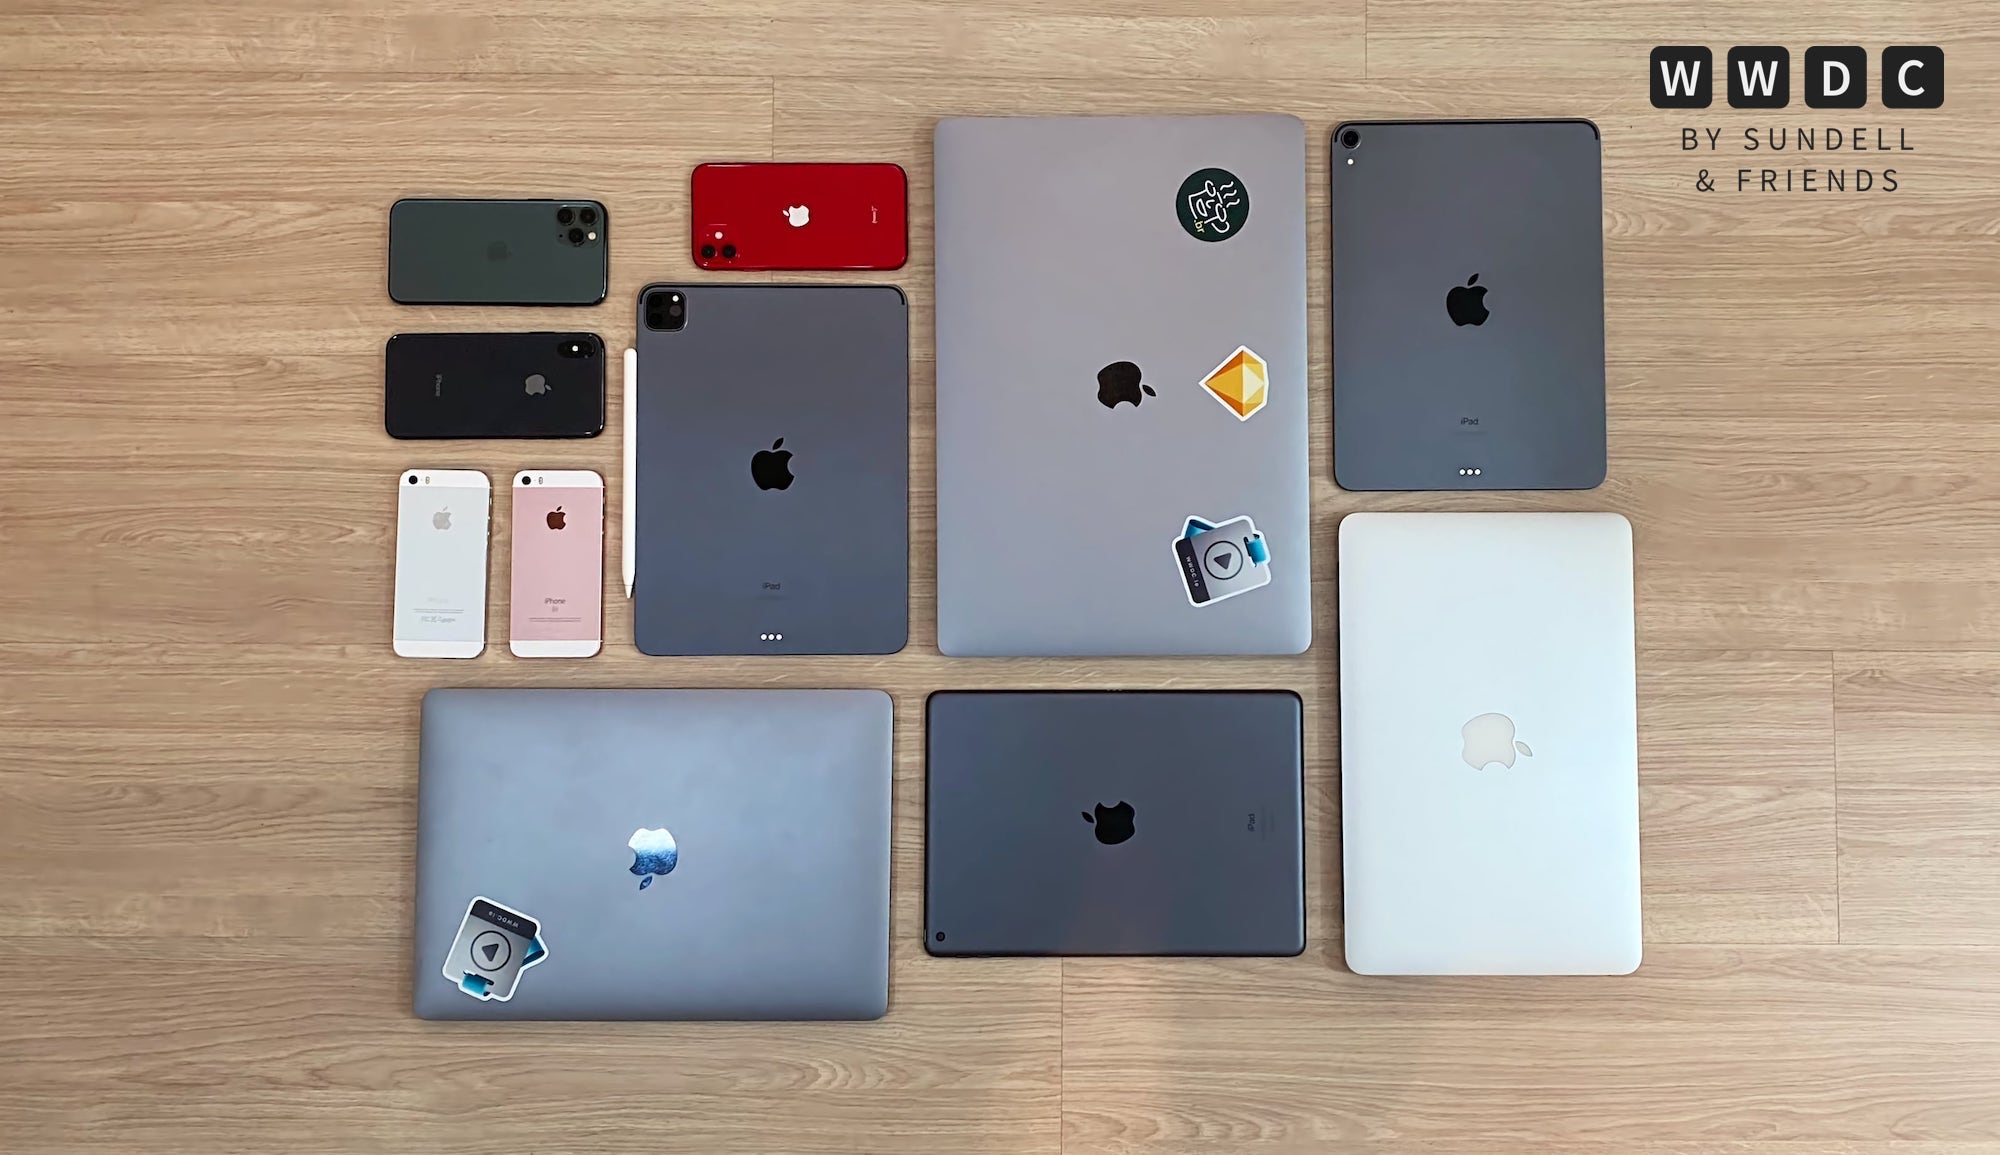 A lot of Apple devices in a grid, shot from above